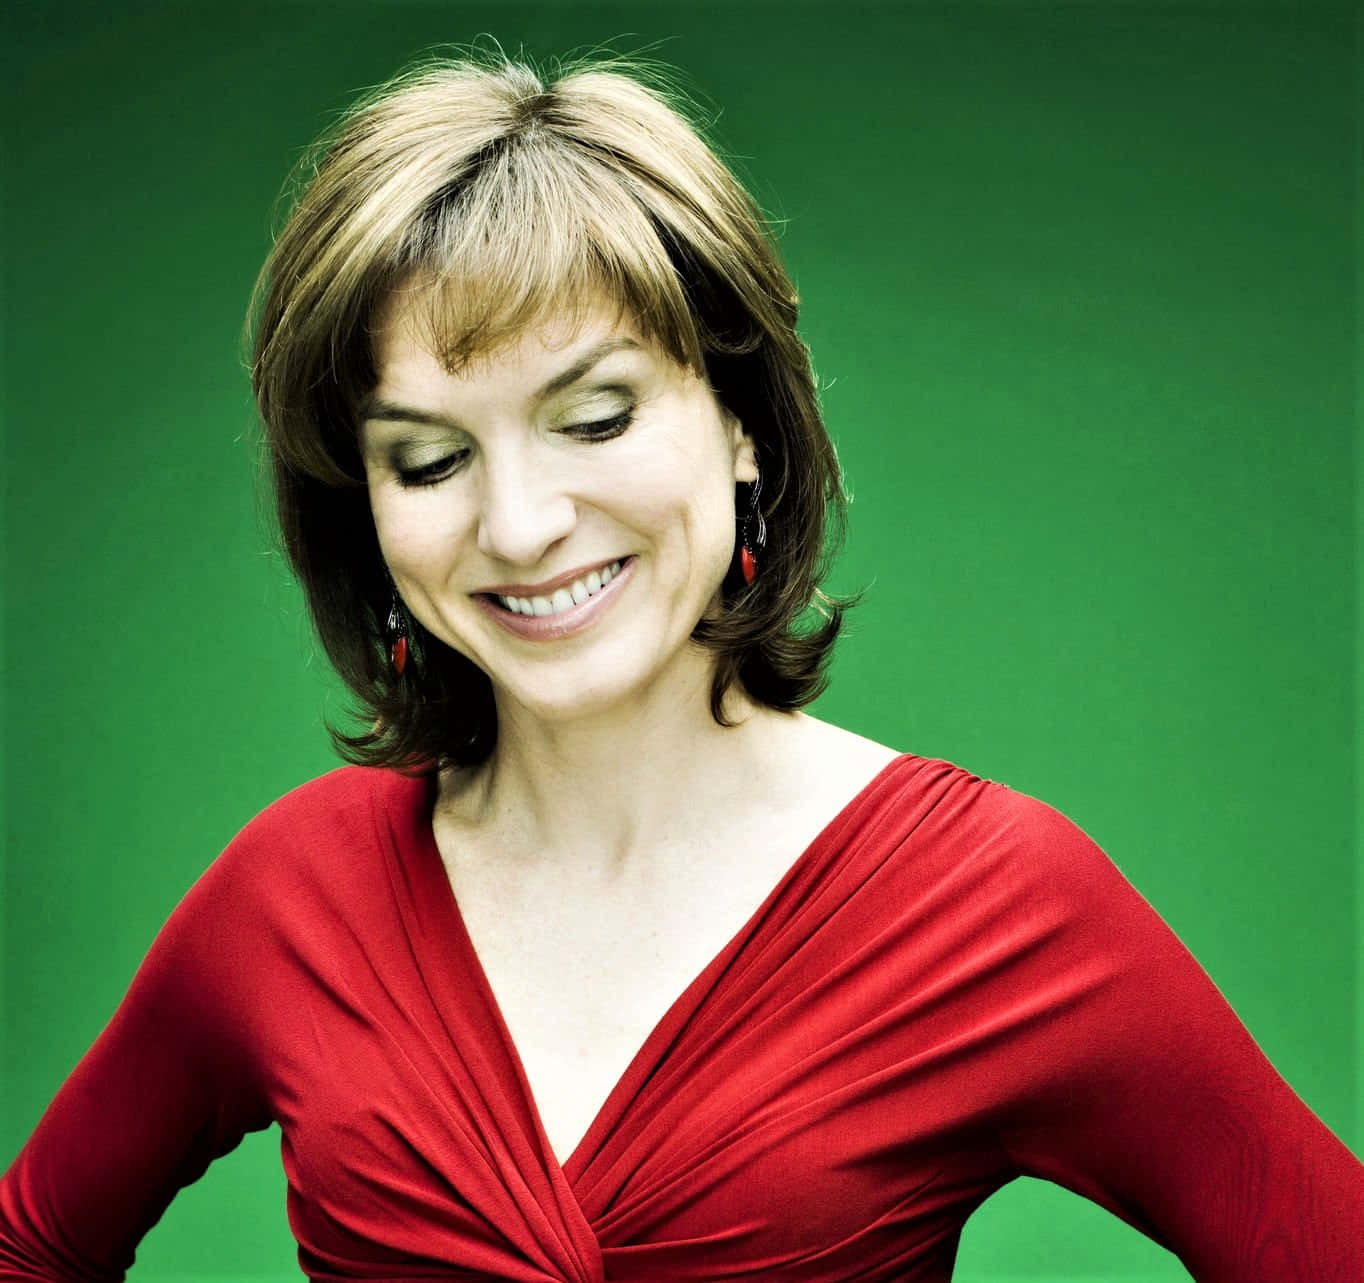 Fiona Bruce Smiling and Confident Wallpaper